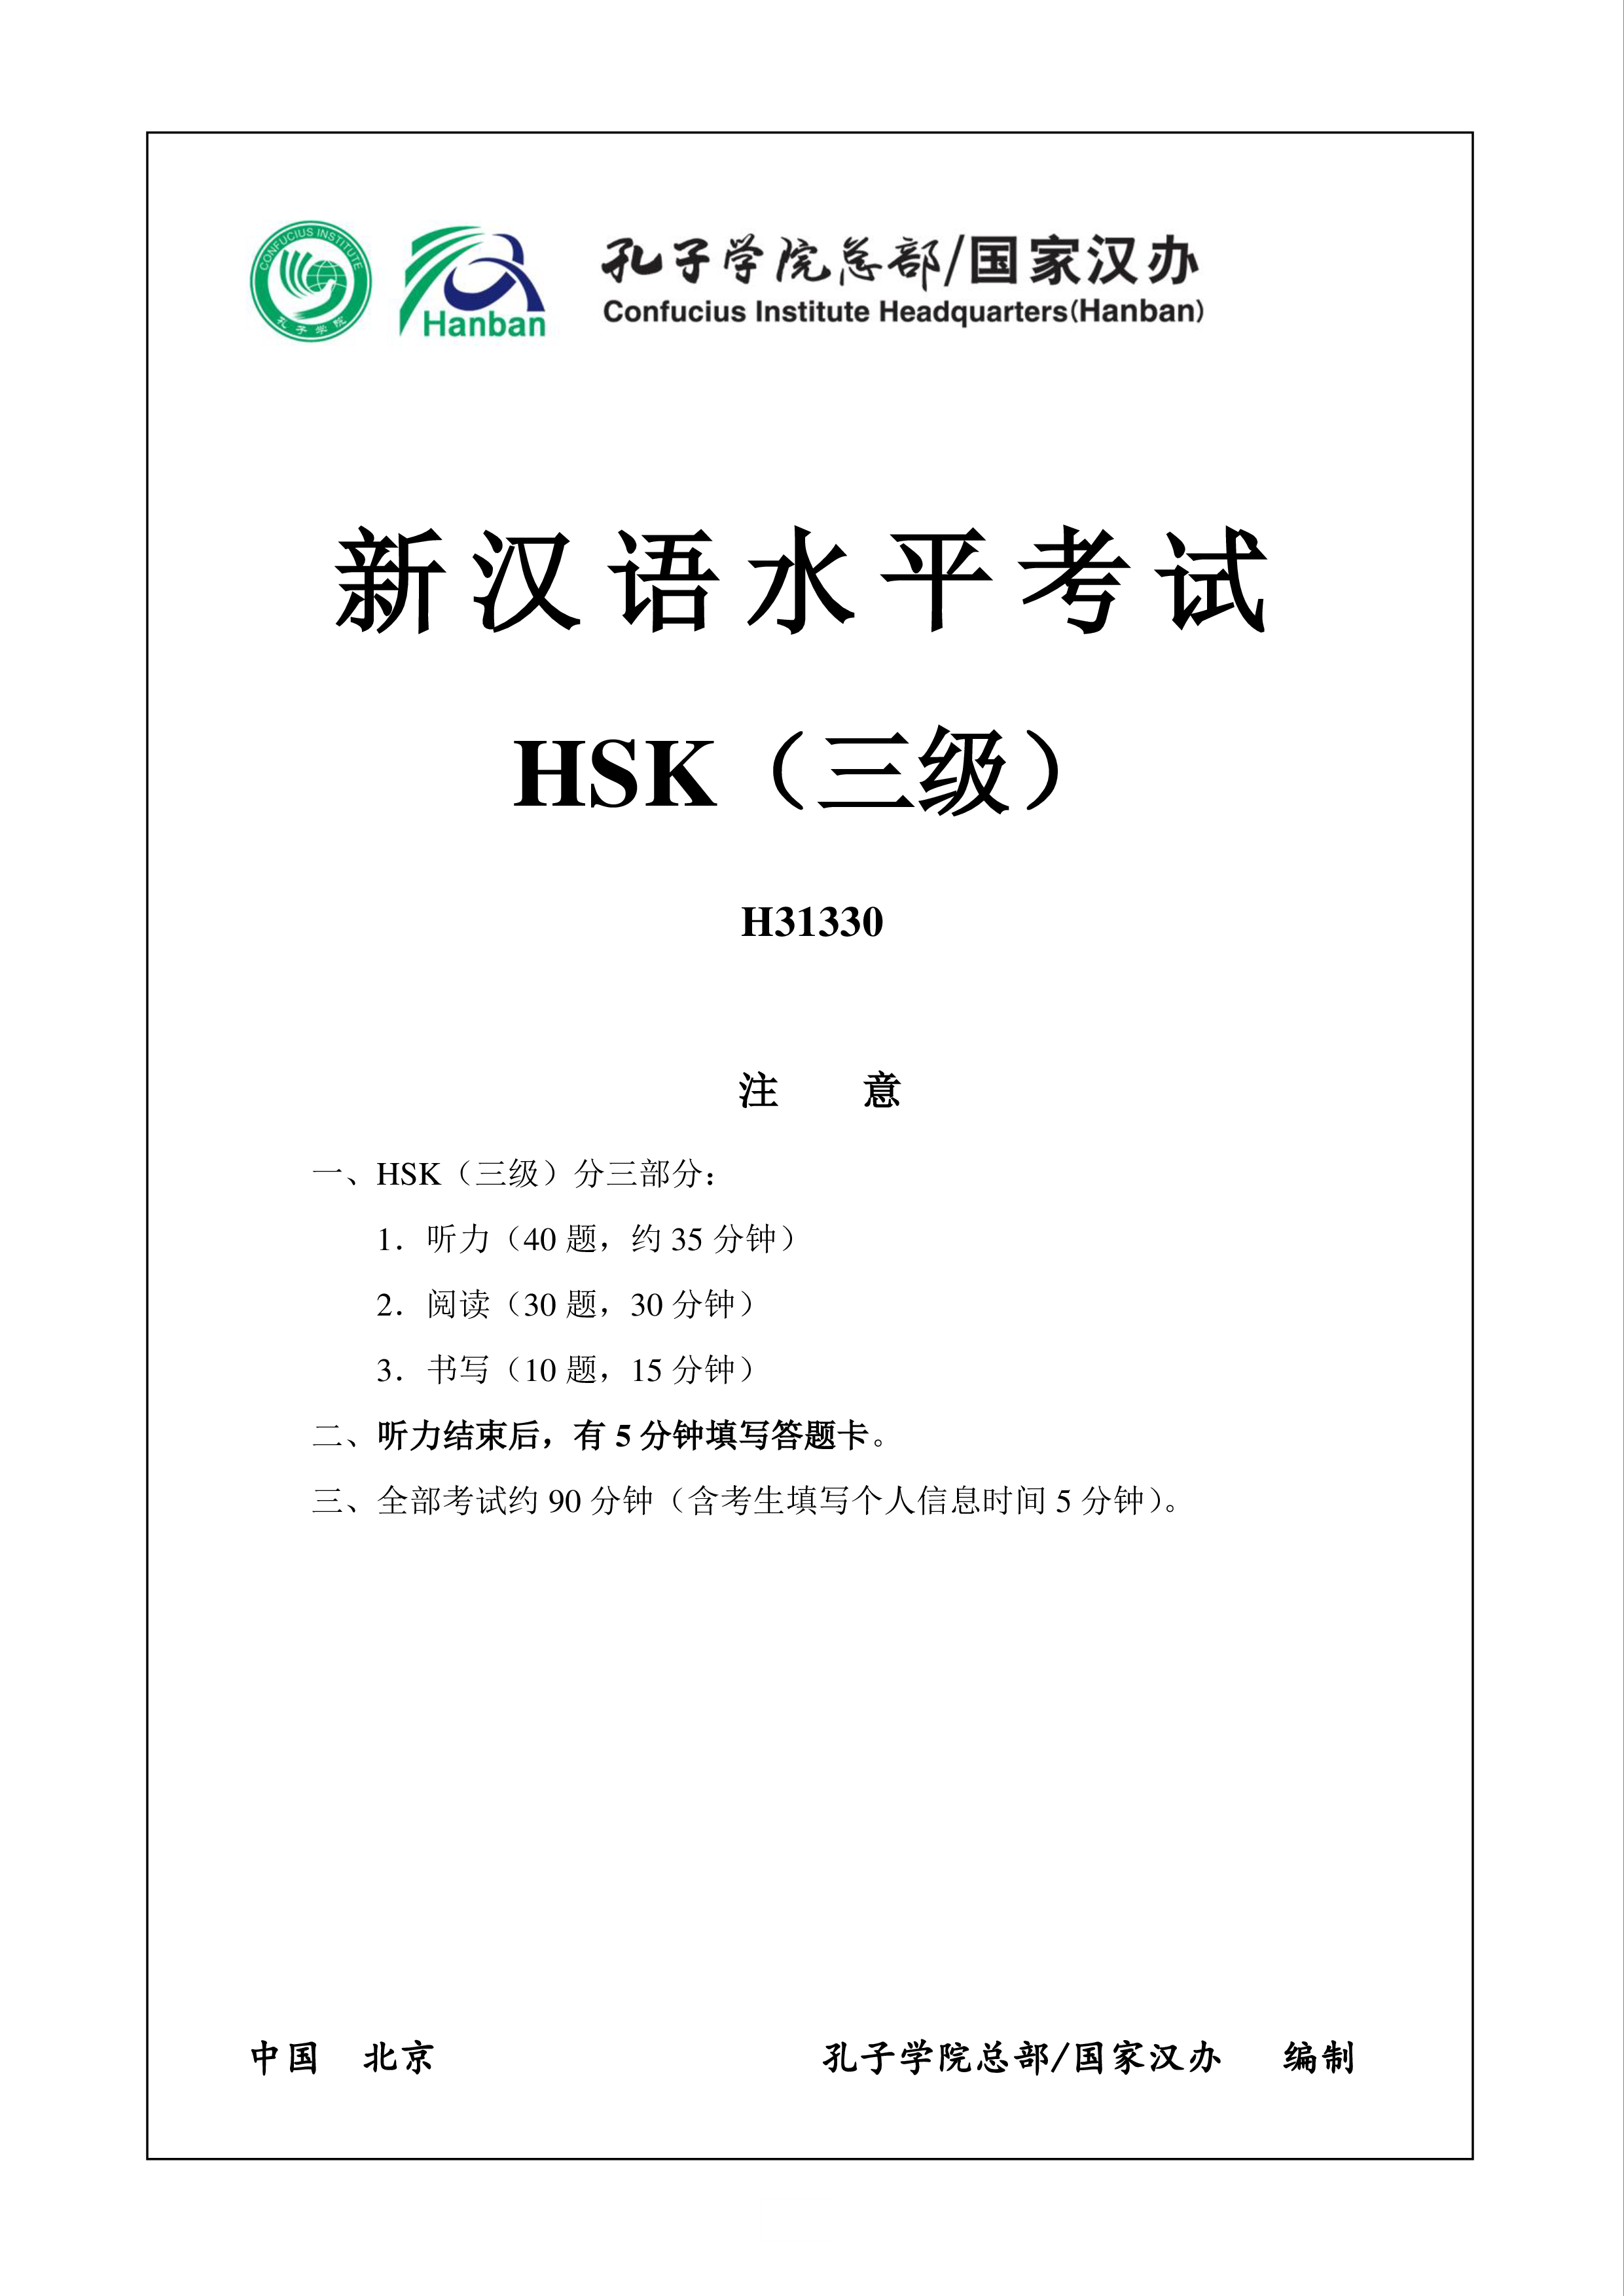 hsk3 chinese exam including answers # hsk3 h31330 template